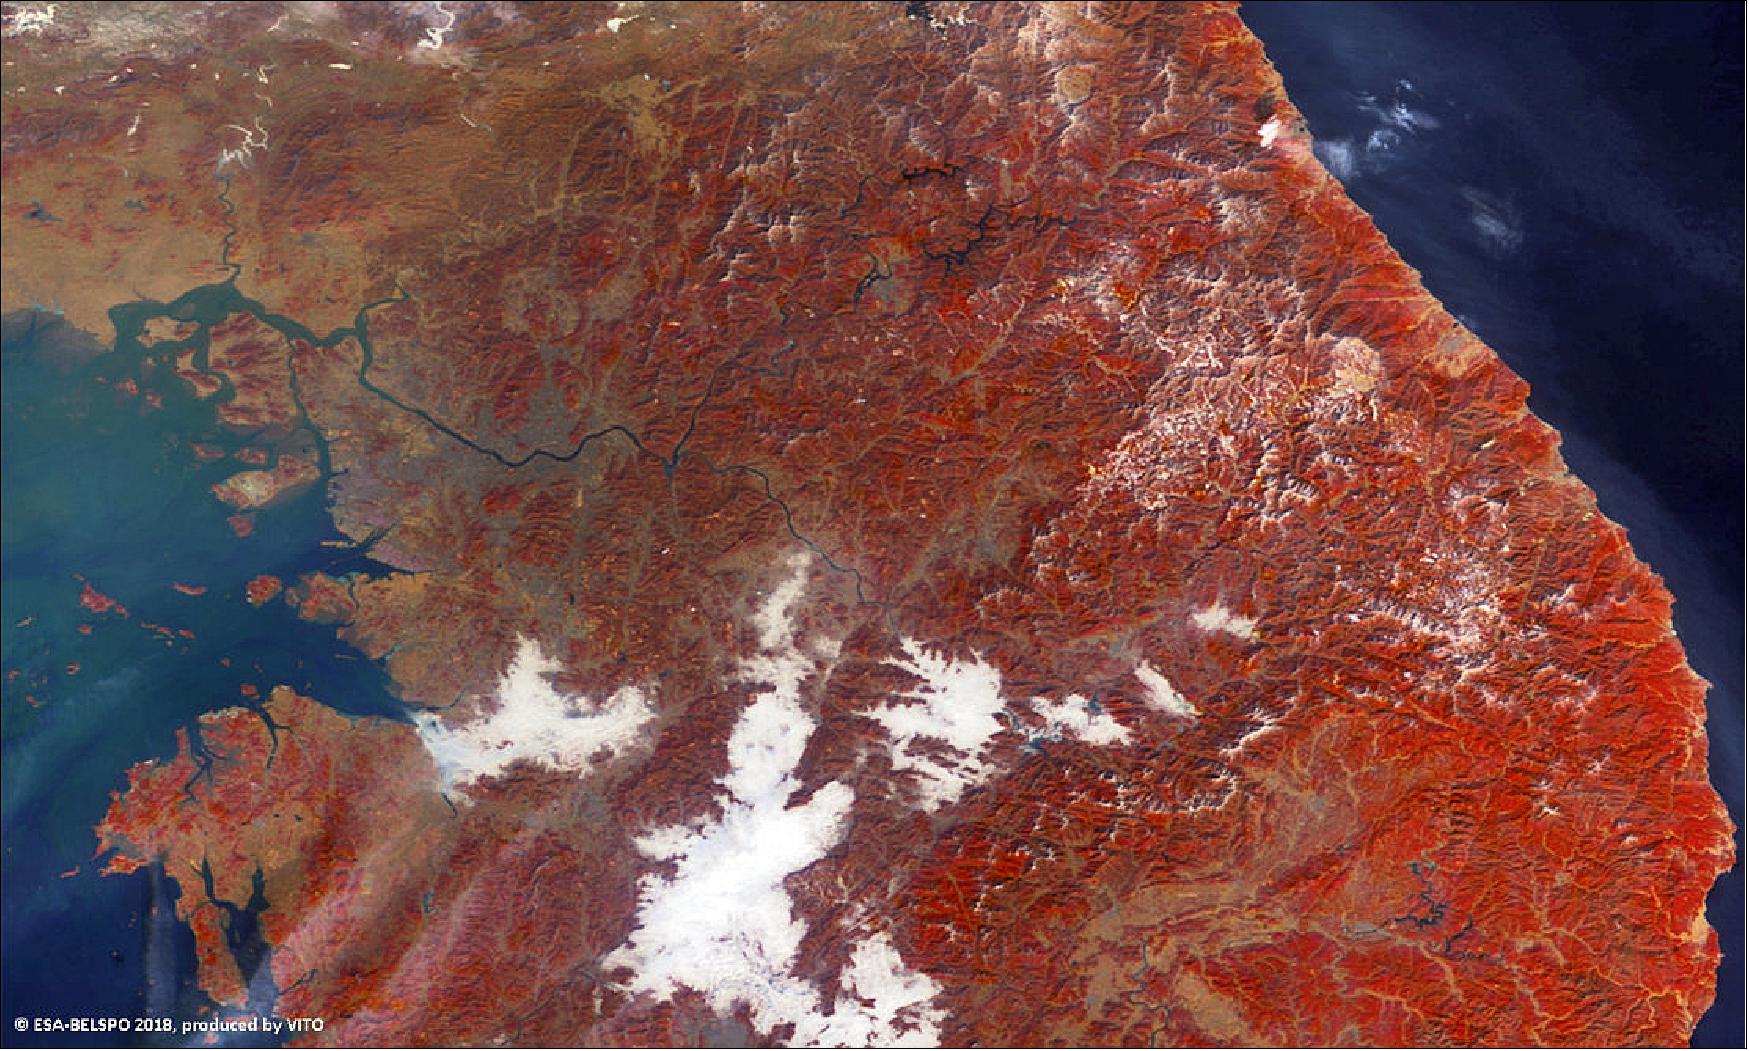 Figure 32: PROBA-V false-color image of a portion of the Korean Peninsula with 300 m resolution, acquired on 21 January 2018 (image credit: ESA/Belspo – produced by VITO)